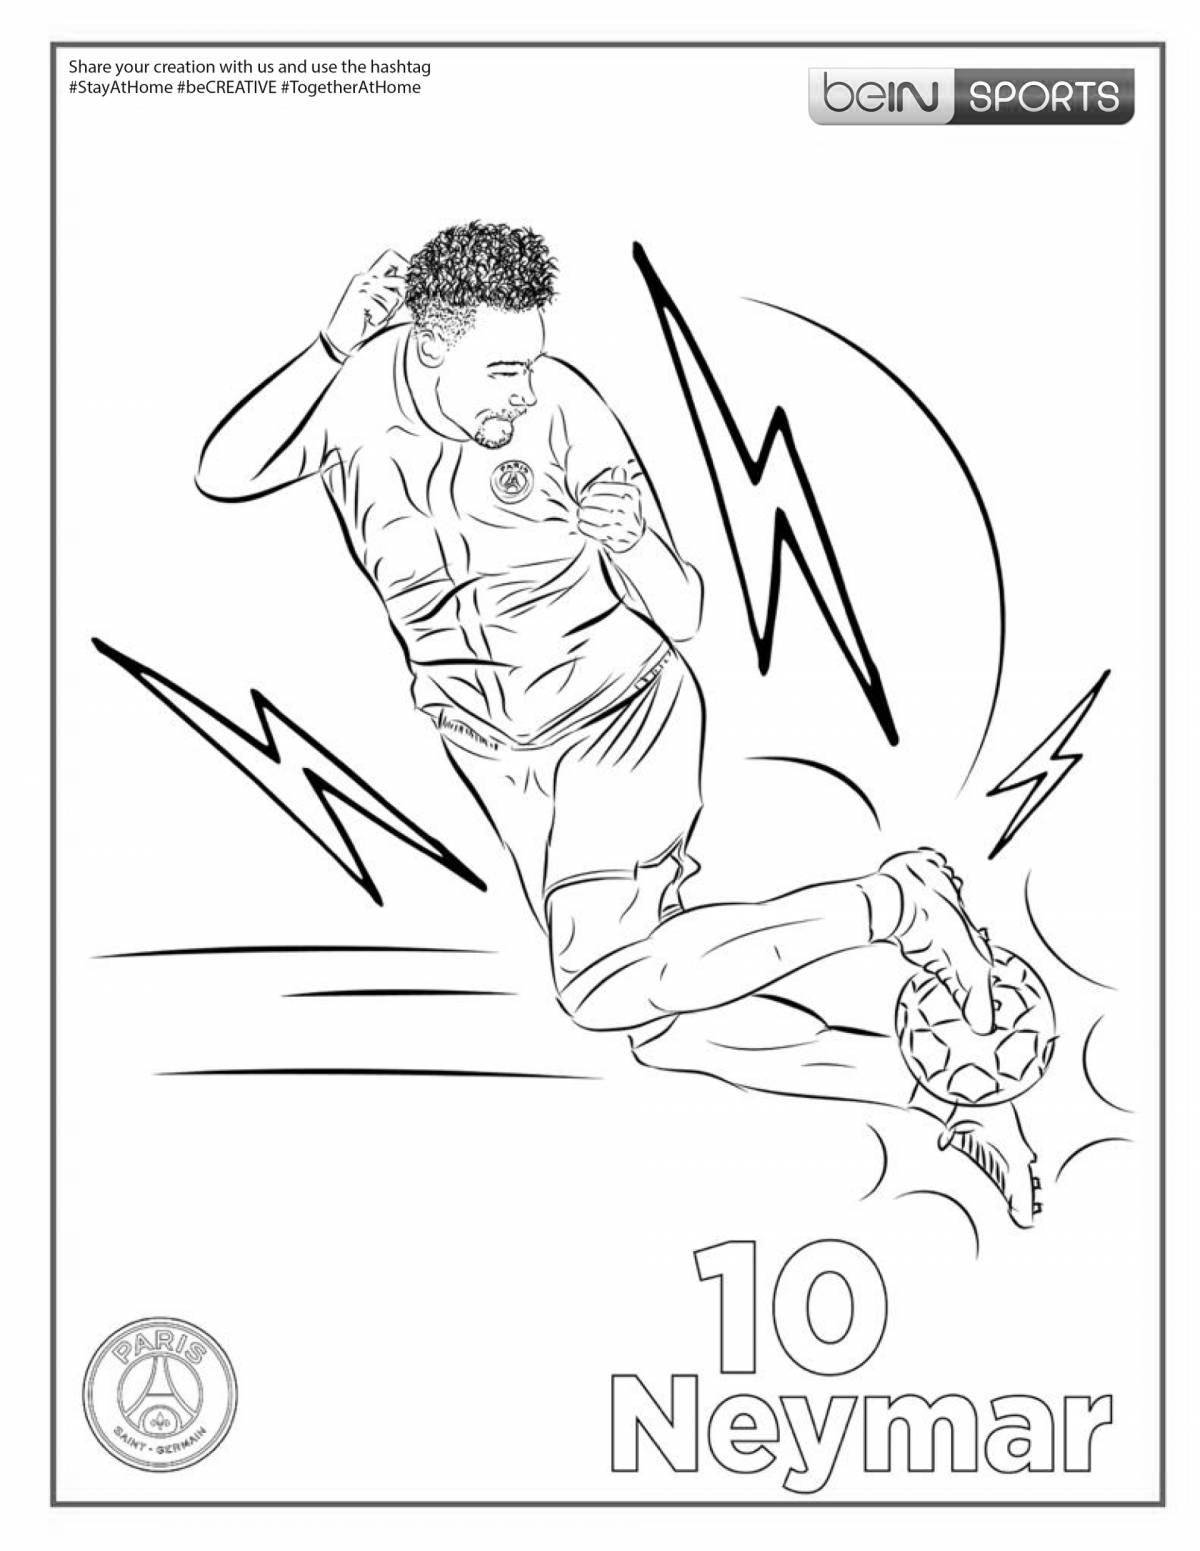 Coloring page glorious killian mbappe